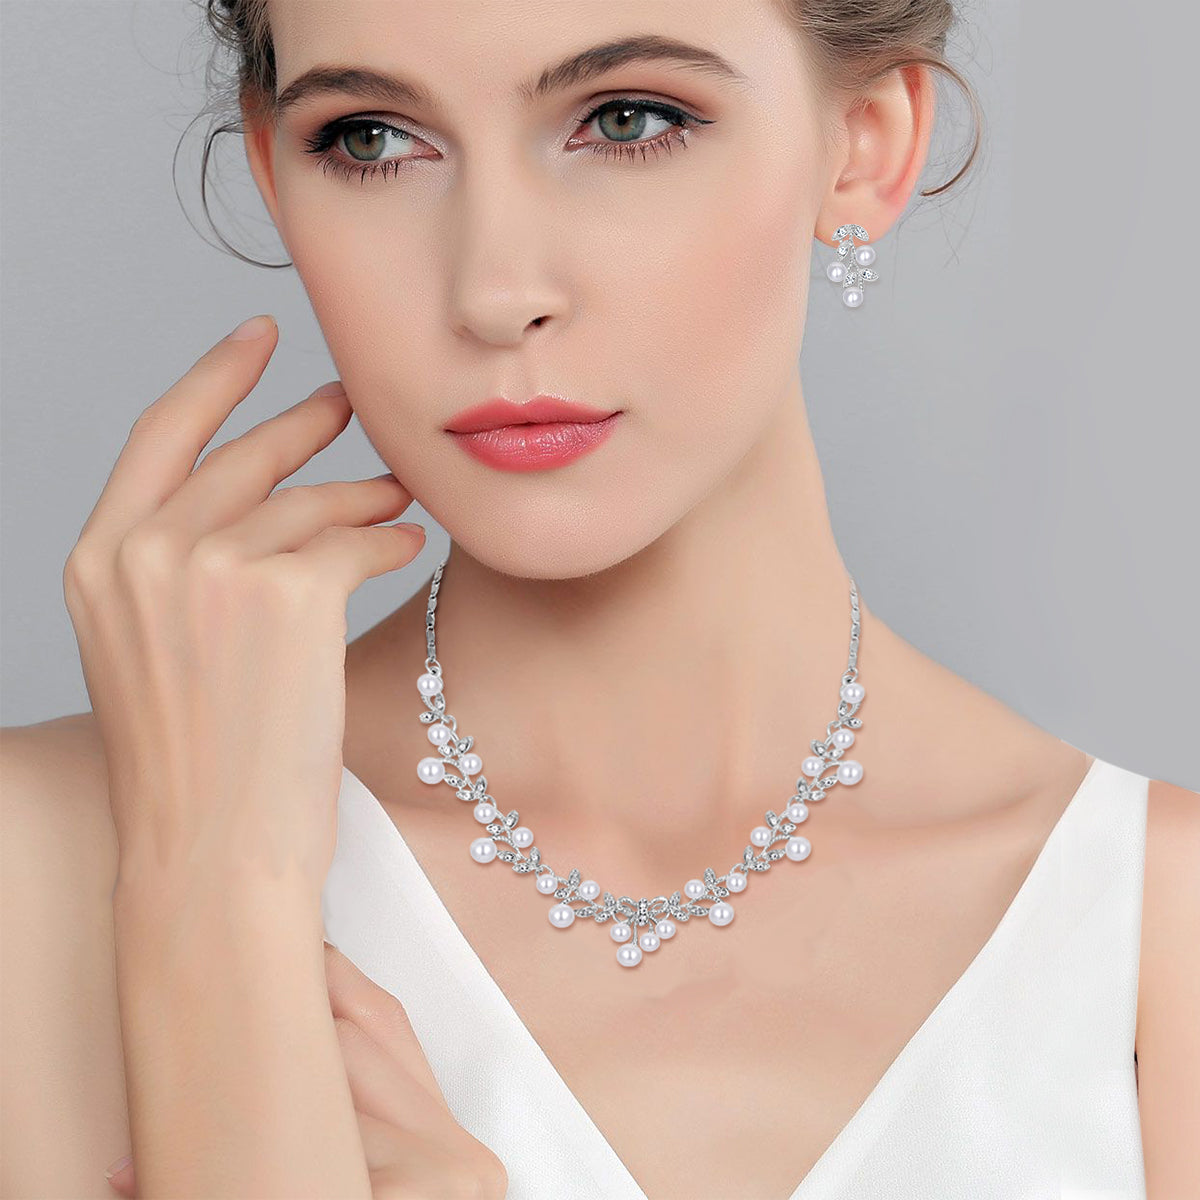 03345 Simulated Pearl White Crystal Party Bridal Vintage Vine Leaf Bowknot Jewelry Set